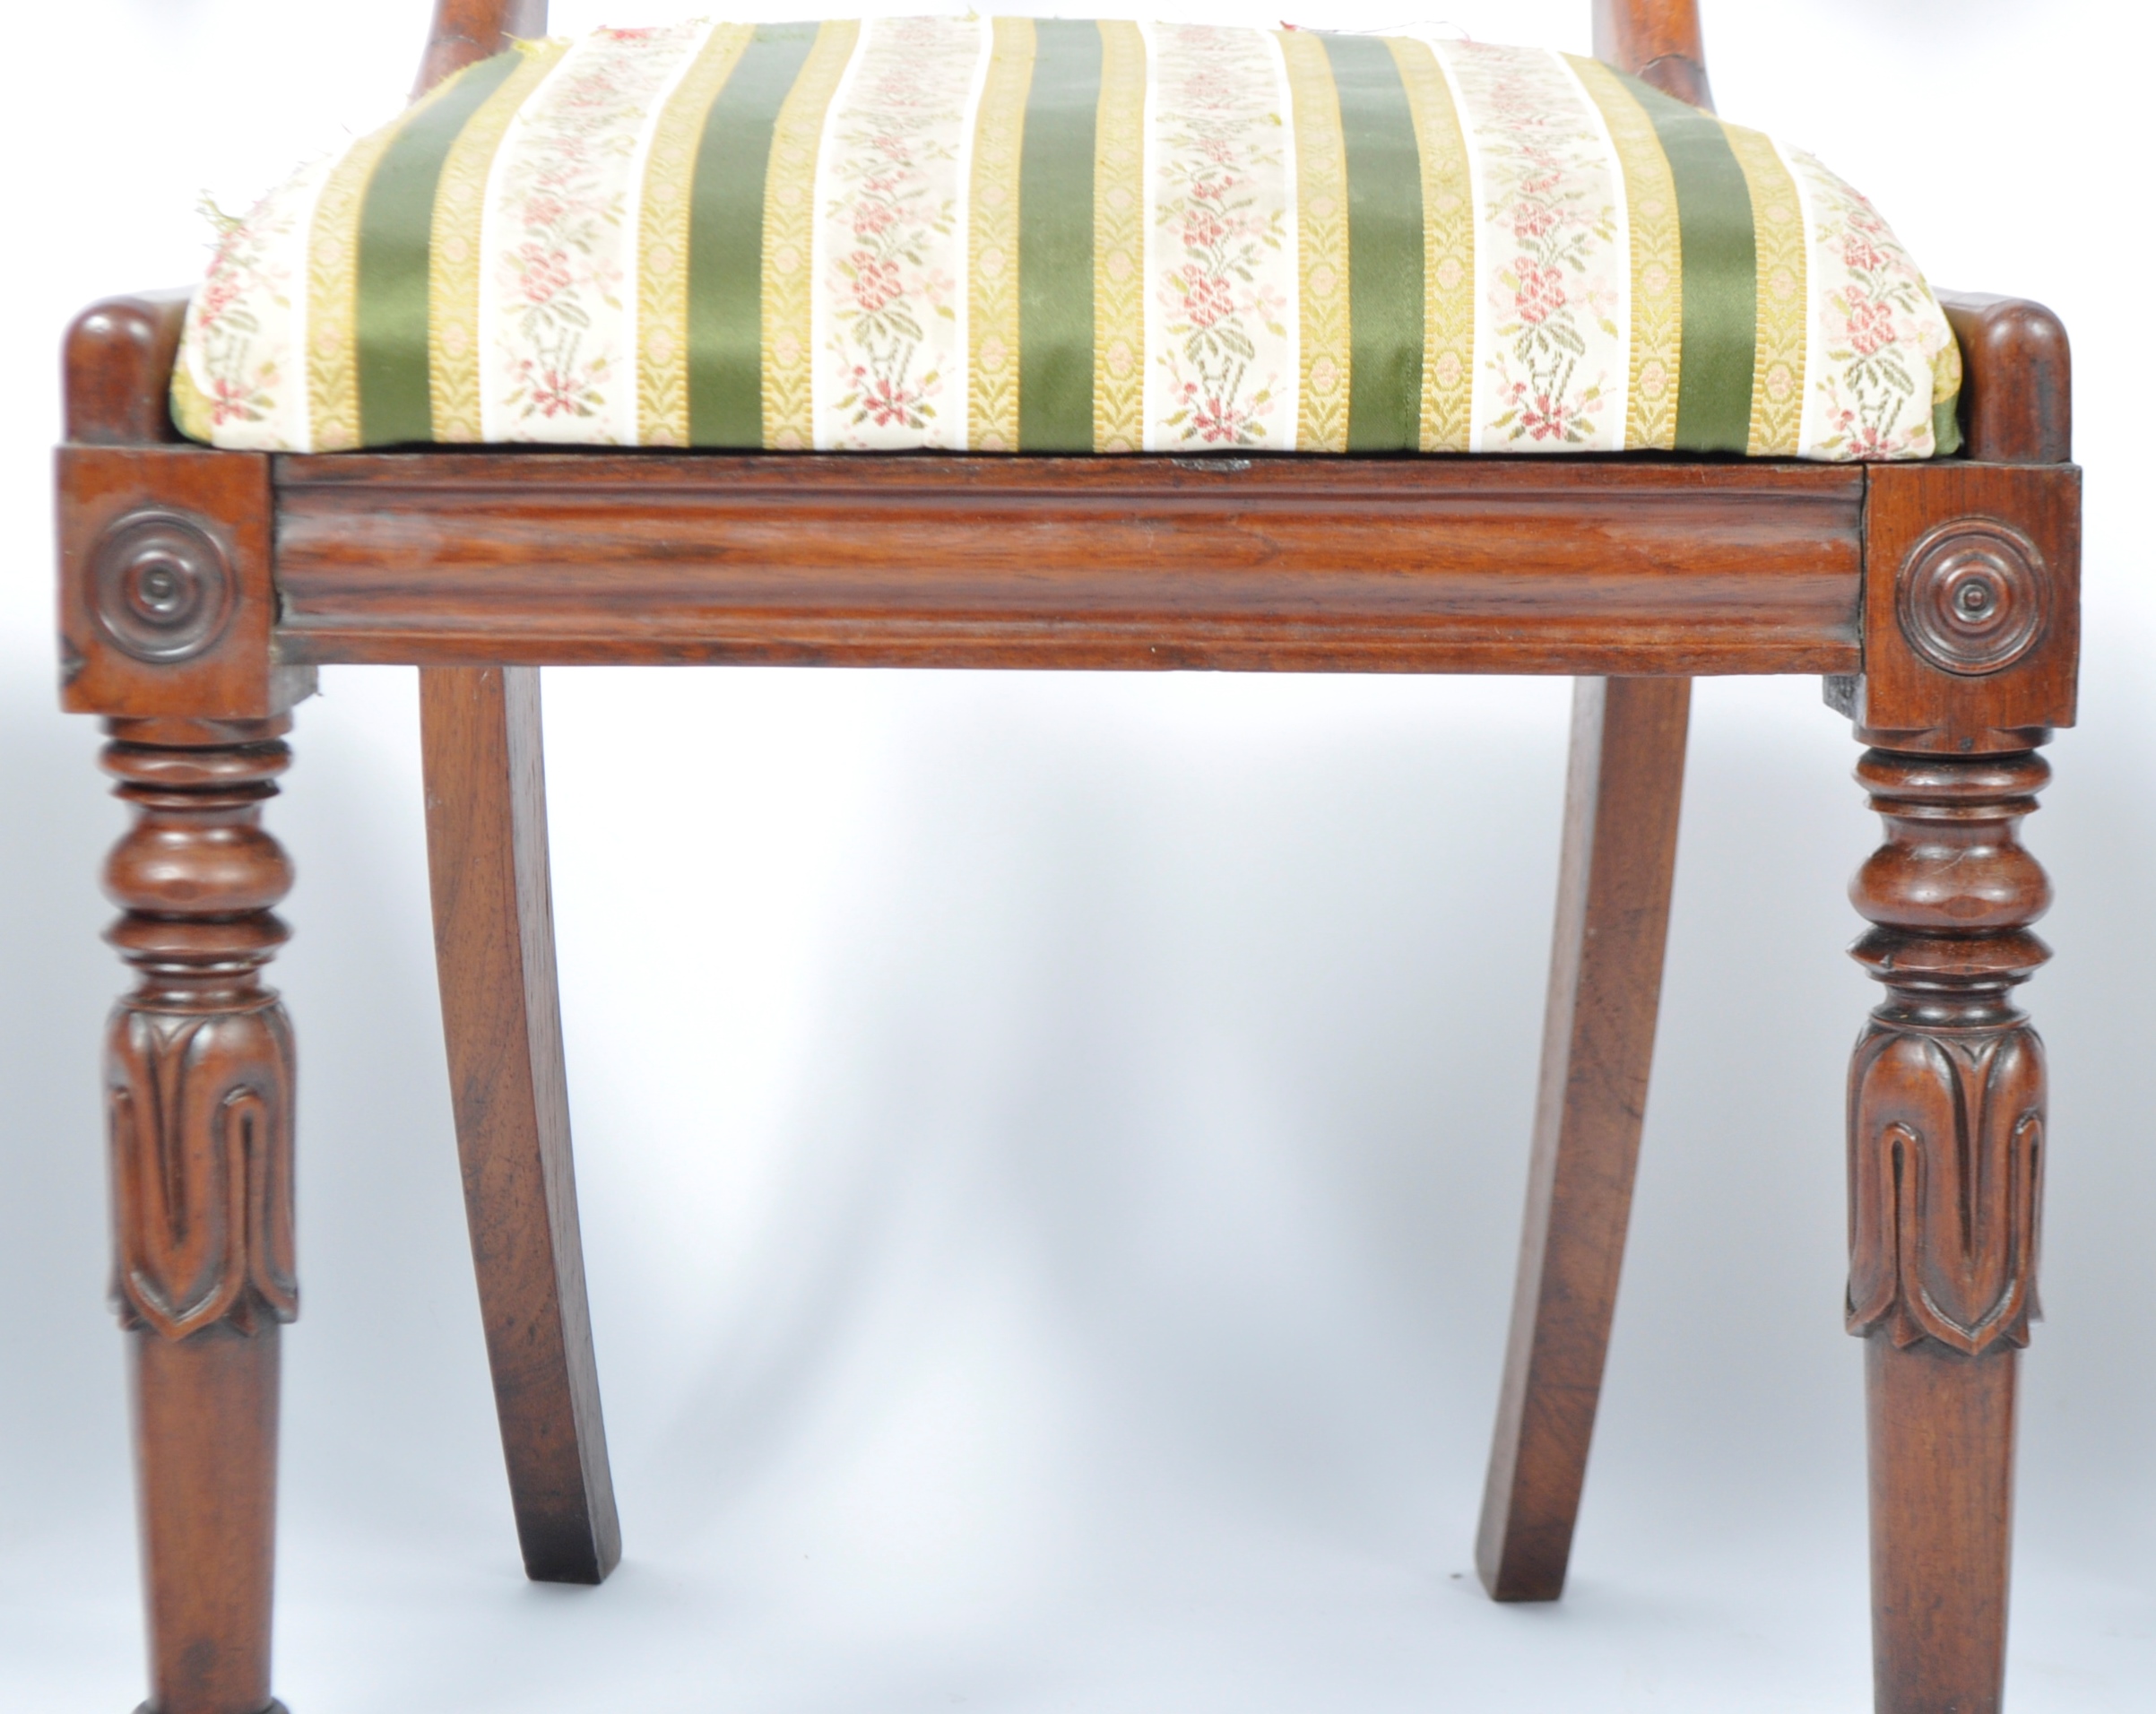 SIX 19TH CENTURY ROSEWOOD DINING CHAIRS IN THE GILLOWS MANNER - Image 8 of 11